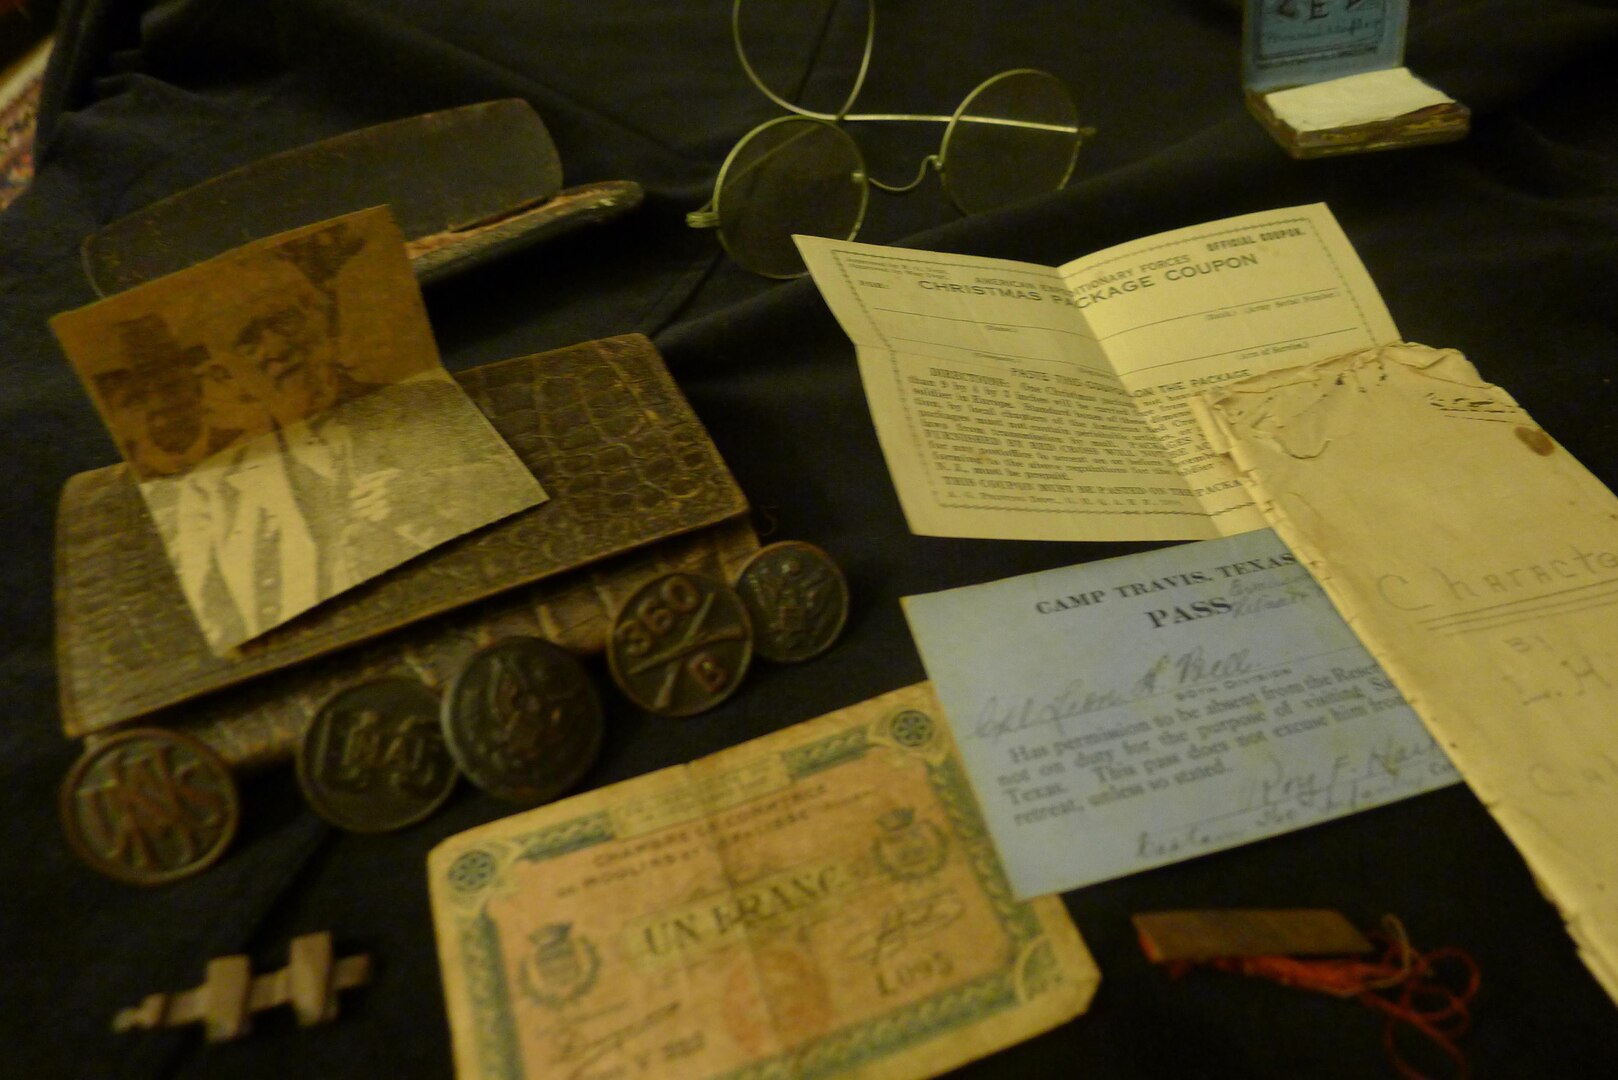 From left: French emergency currency; unidentified uniform insignia; Army uniform buttons, wallet; spectacles and case; newspaper photo of unidentified man, French cigarette rolling papers; label for Christmas package; liberty pass from Camp Travis, San Antonio; remains of medal or pin; 1913 essay on character.